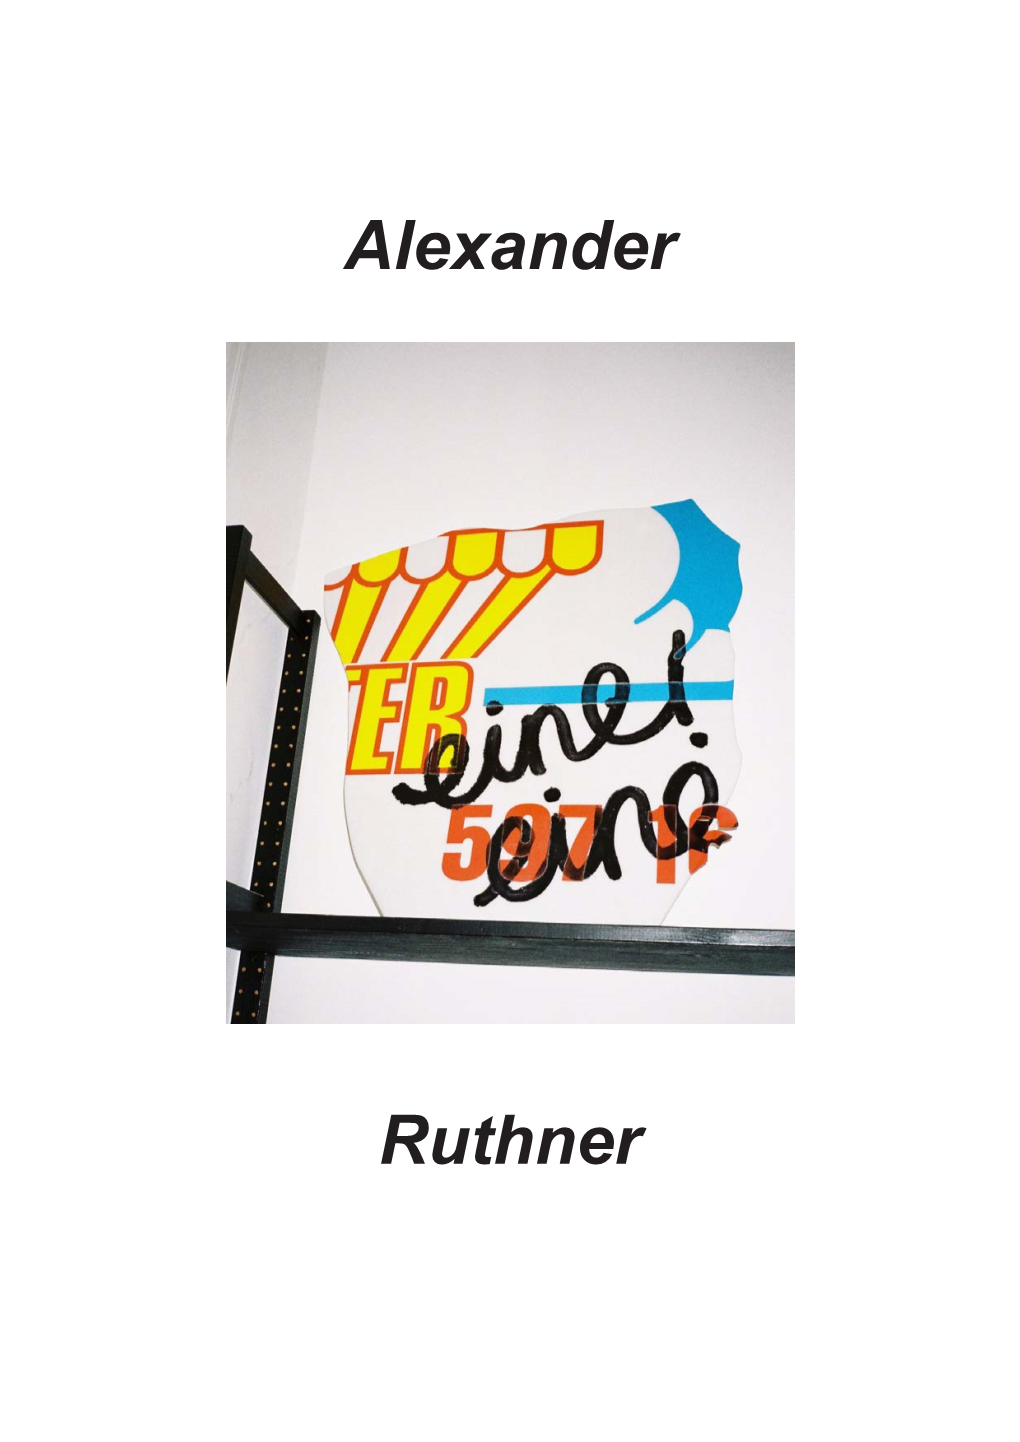 Alexander Ruthners Paintings Give the Impression of Ornamental Patterns and Aesthetical Decor